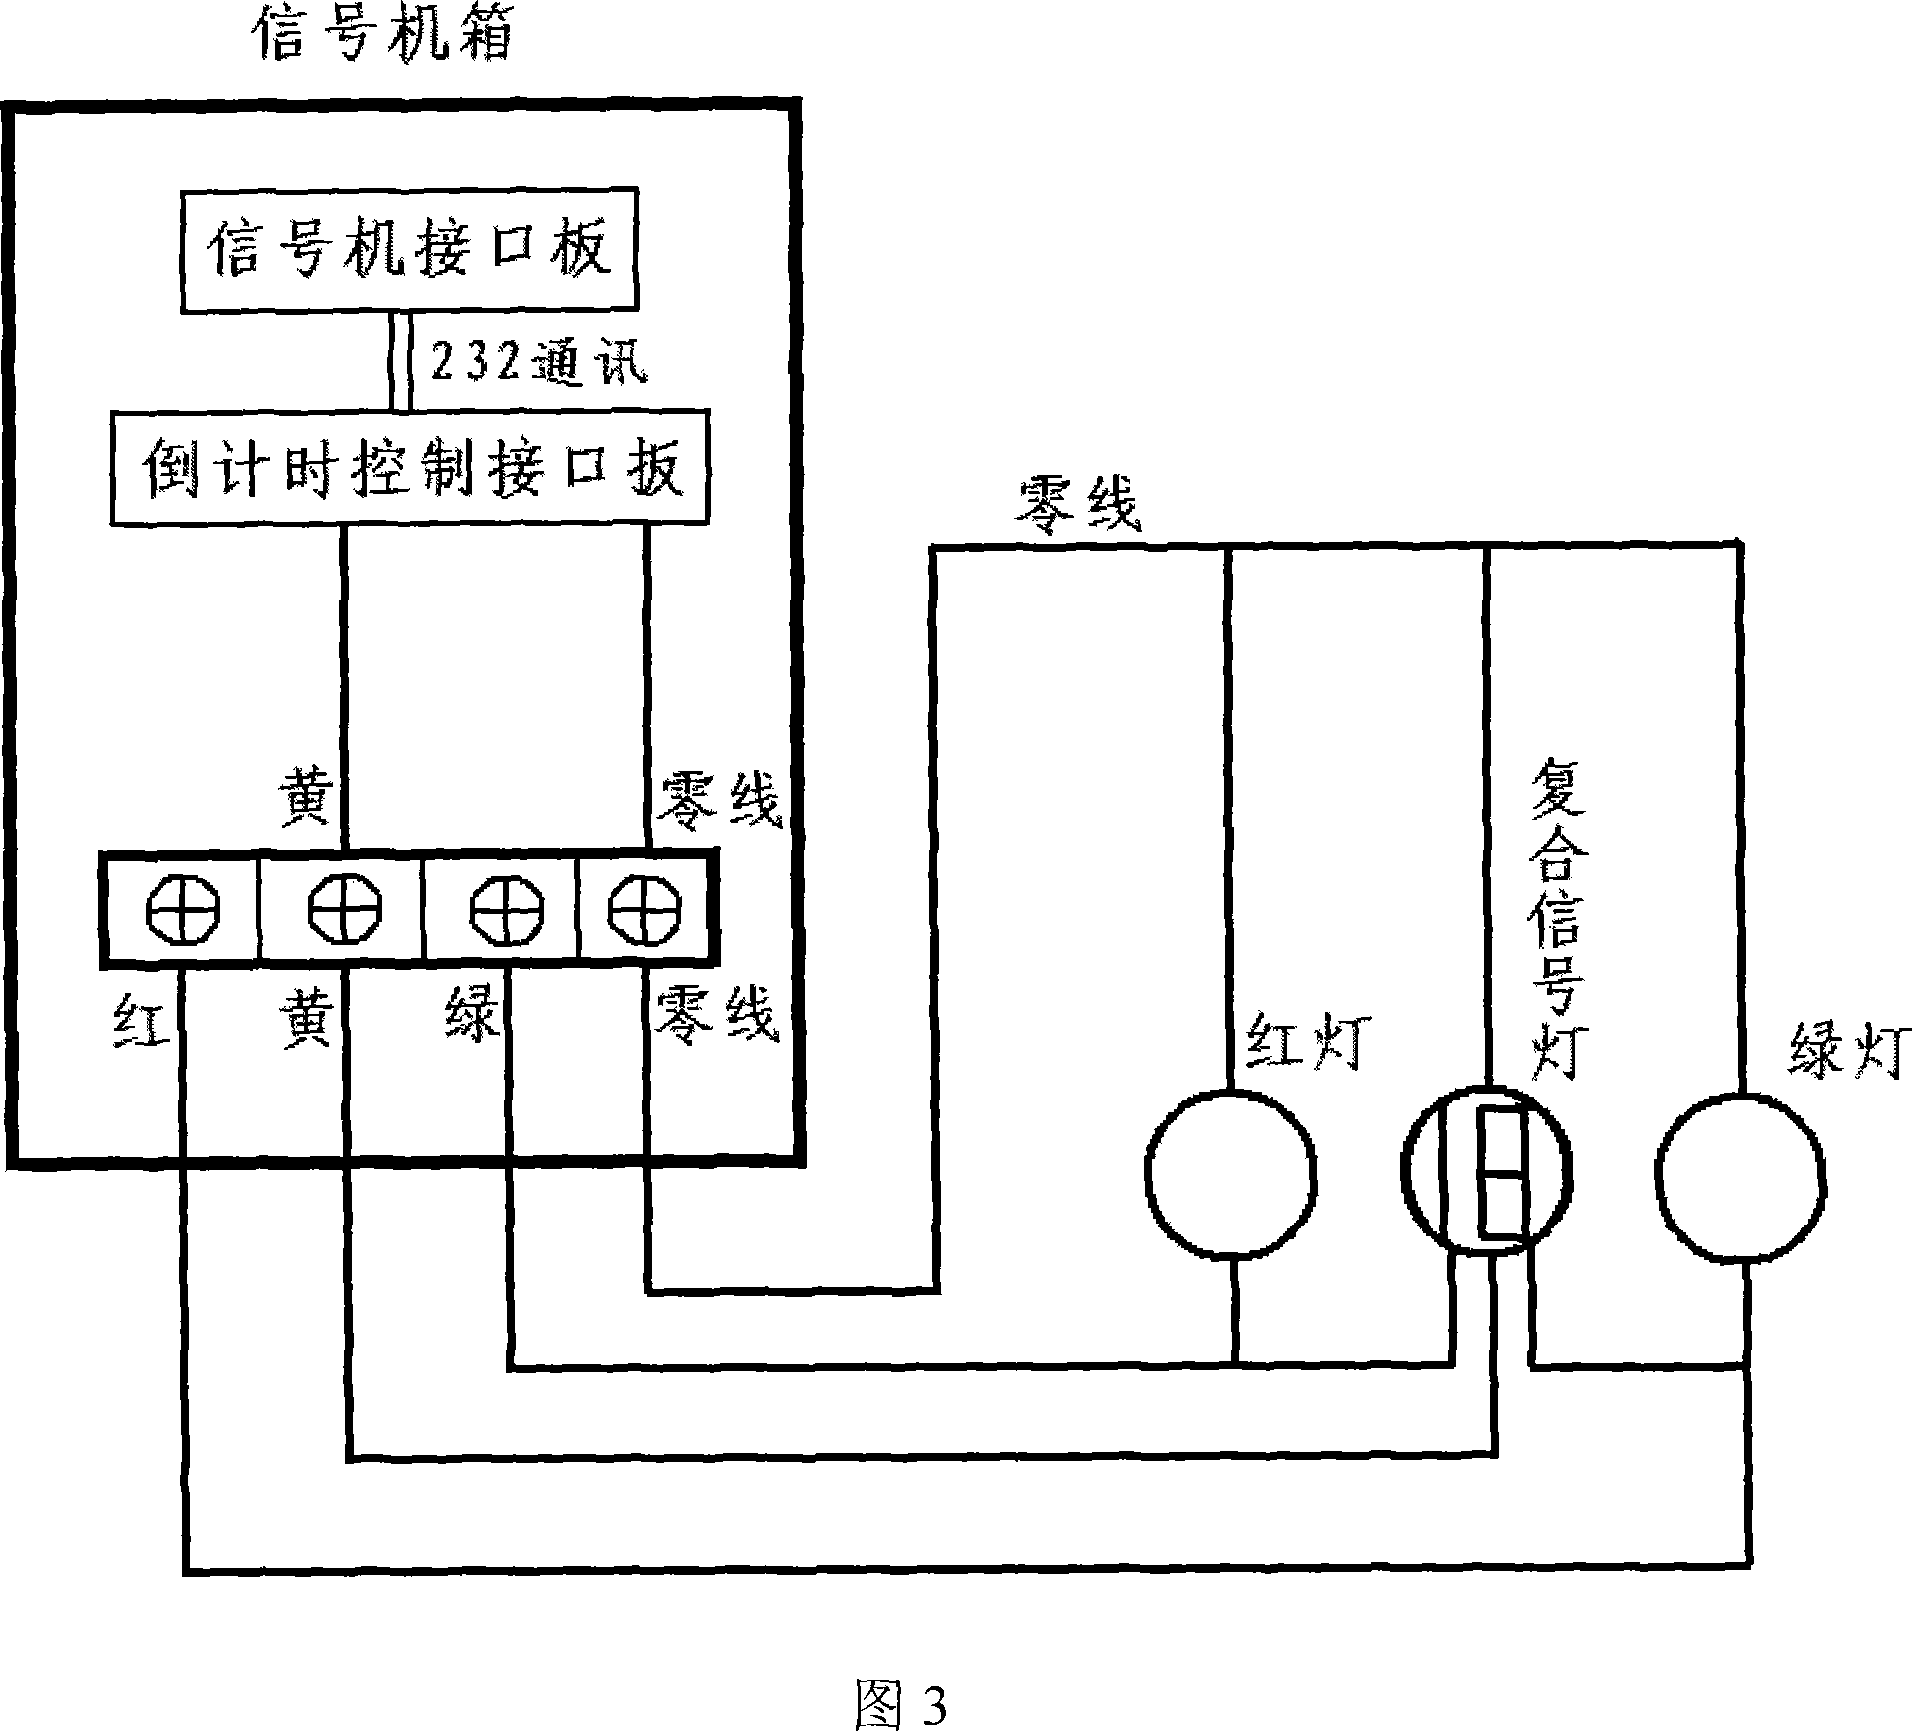 Method for controlling traffic signal light with inverse-hour display